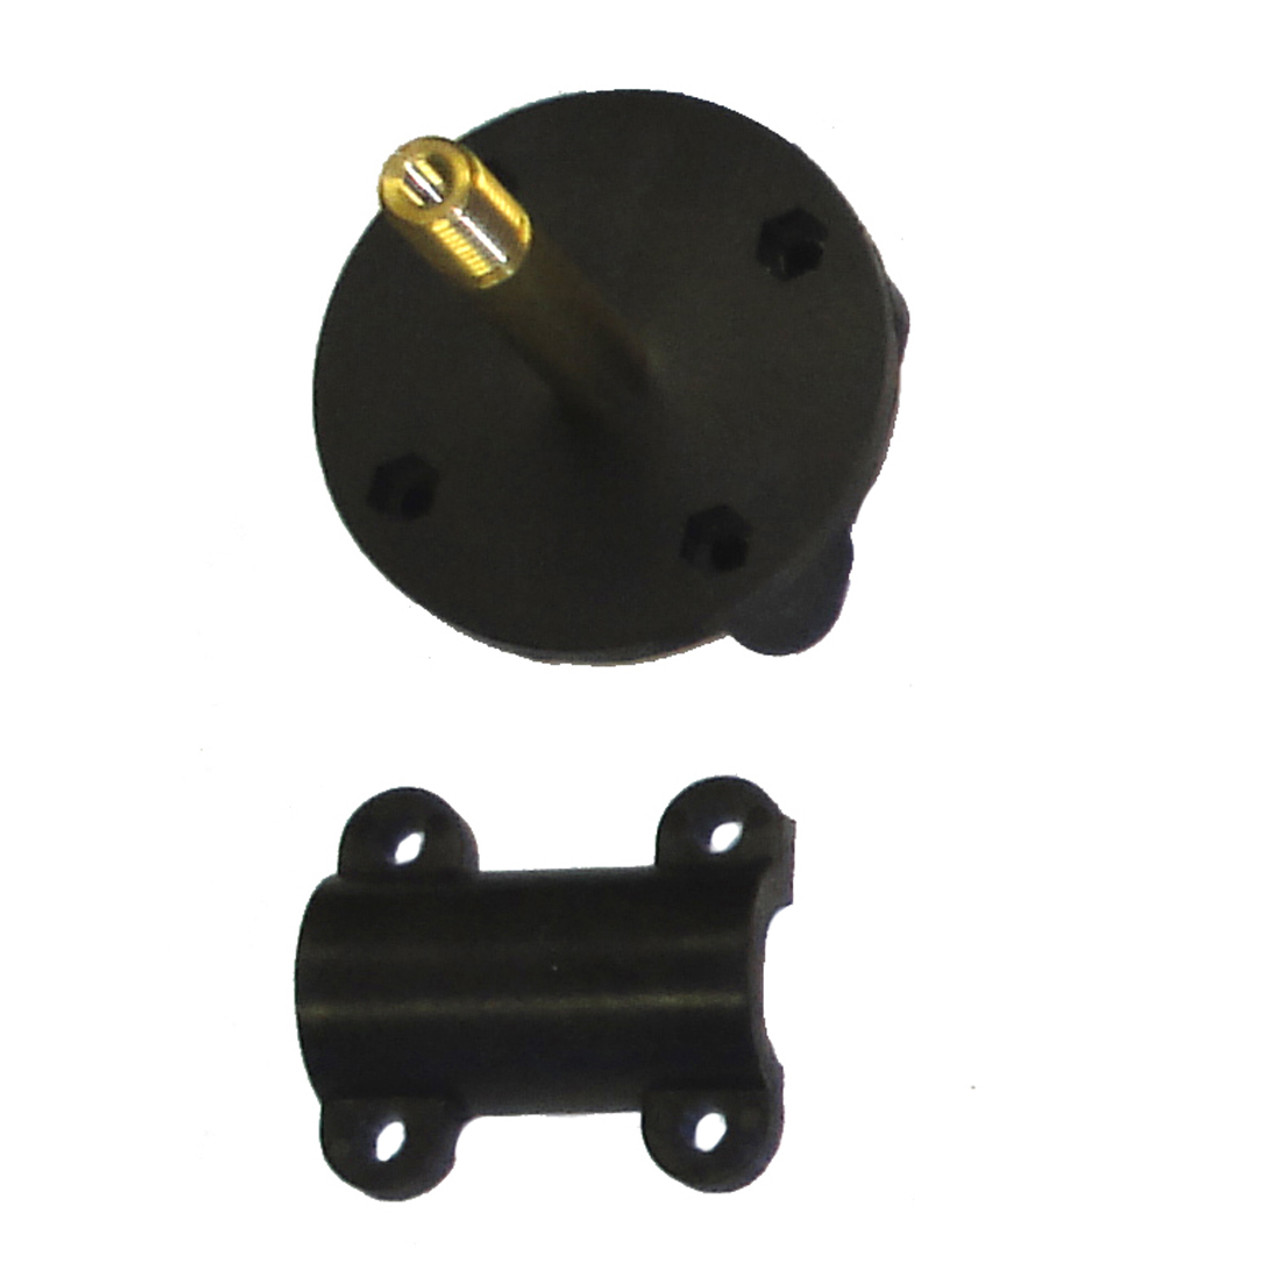 Kolstrand Nylon Mounting Flange with LH Threaded Brass Axle, S/S Pin and Nylon Cap-Sub Assembly - Piece 13LH